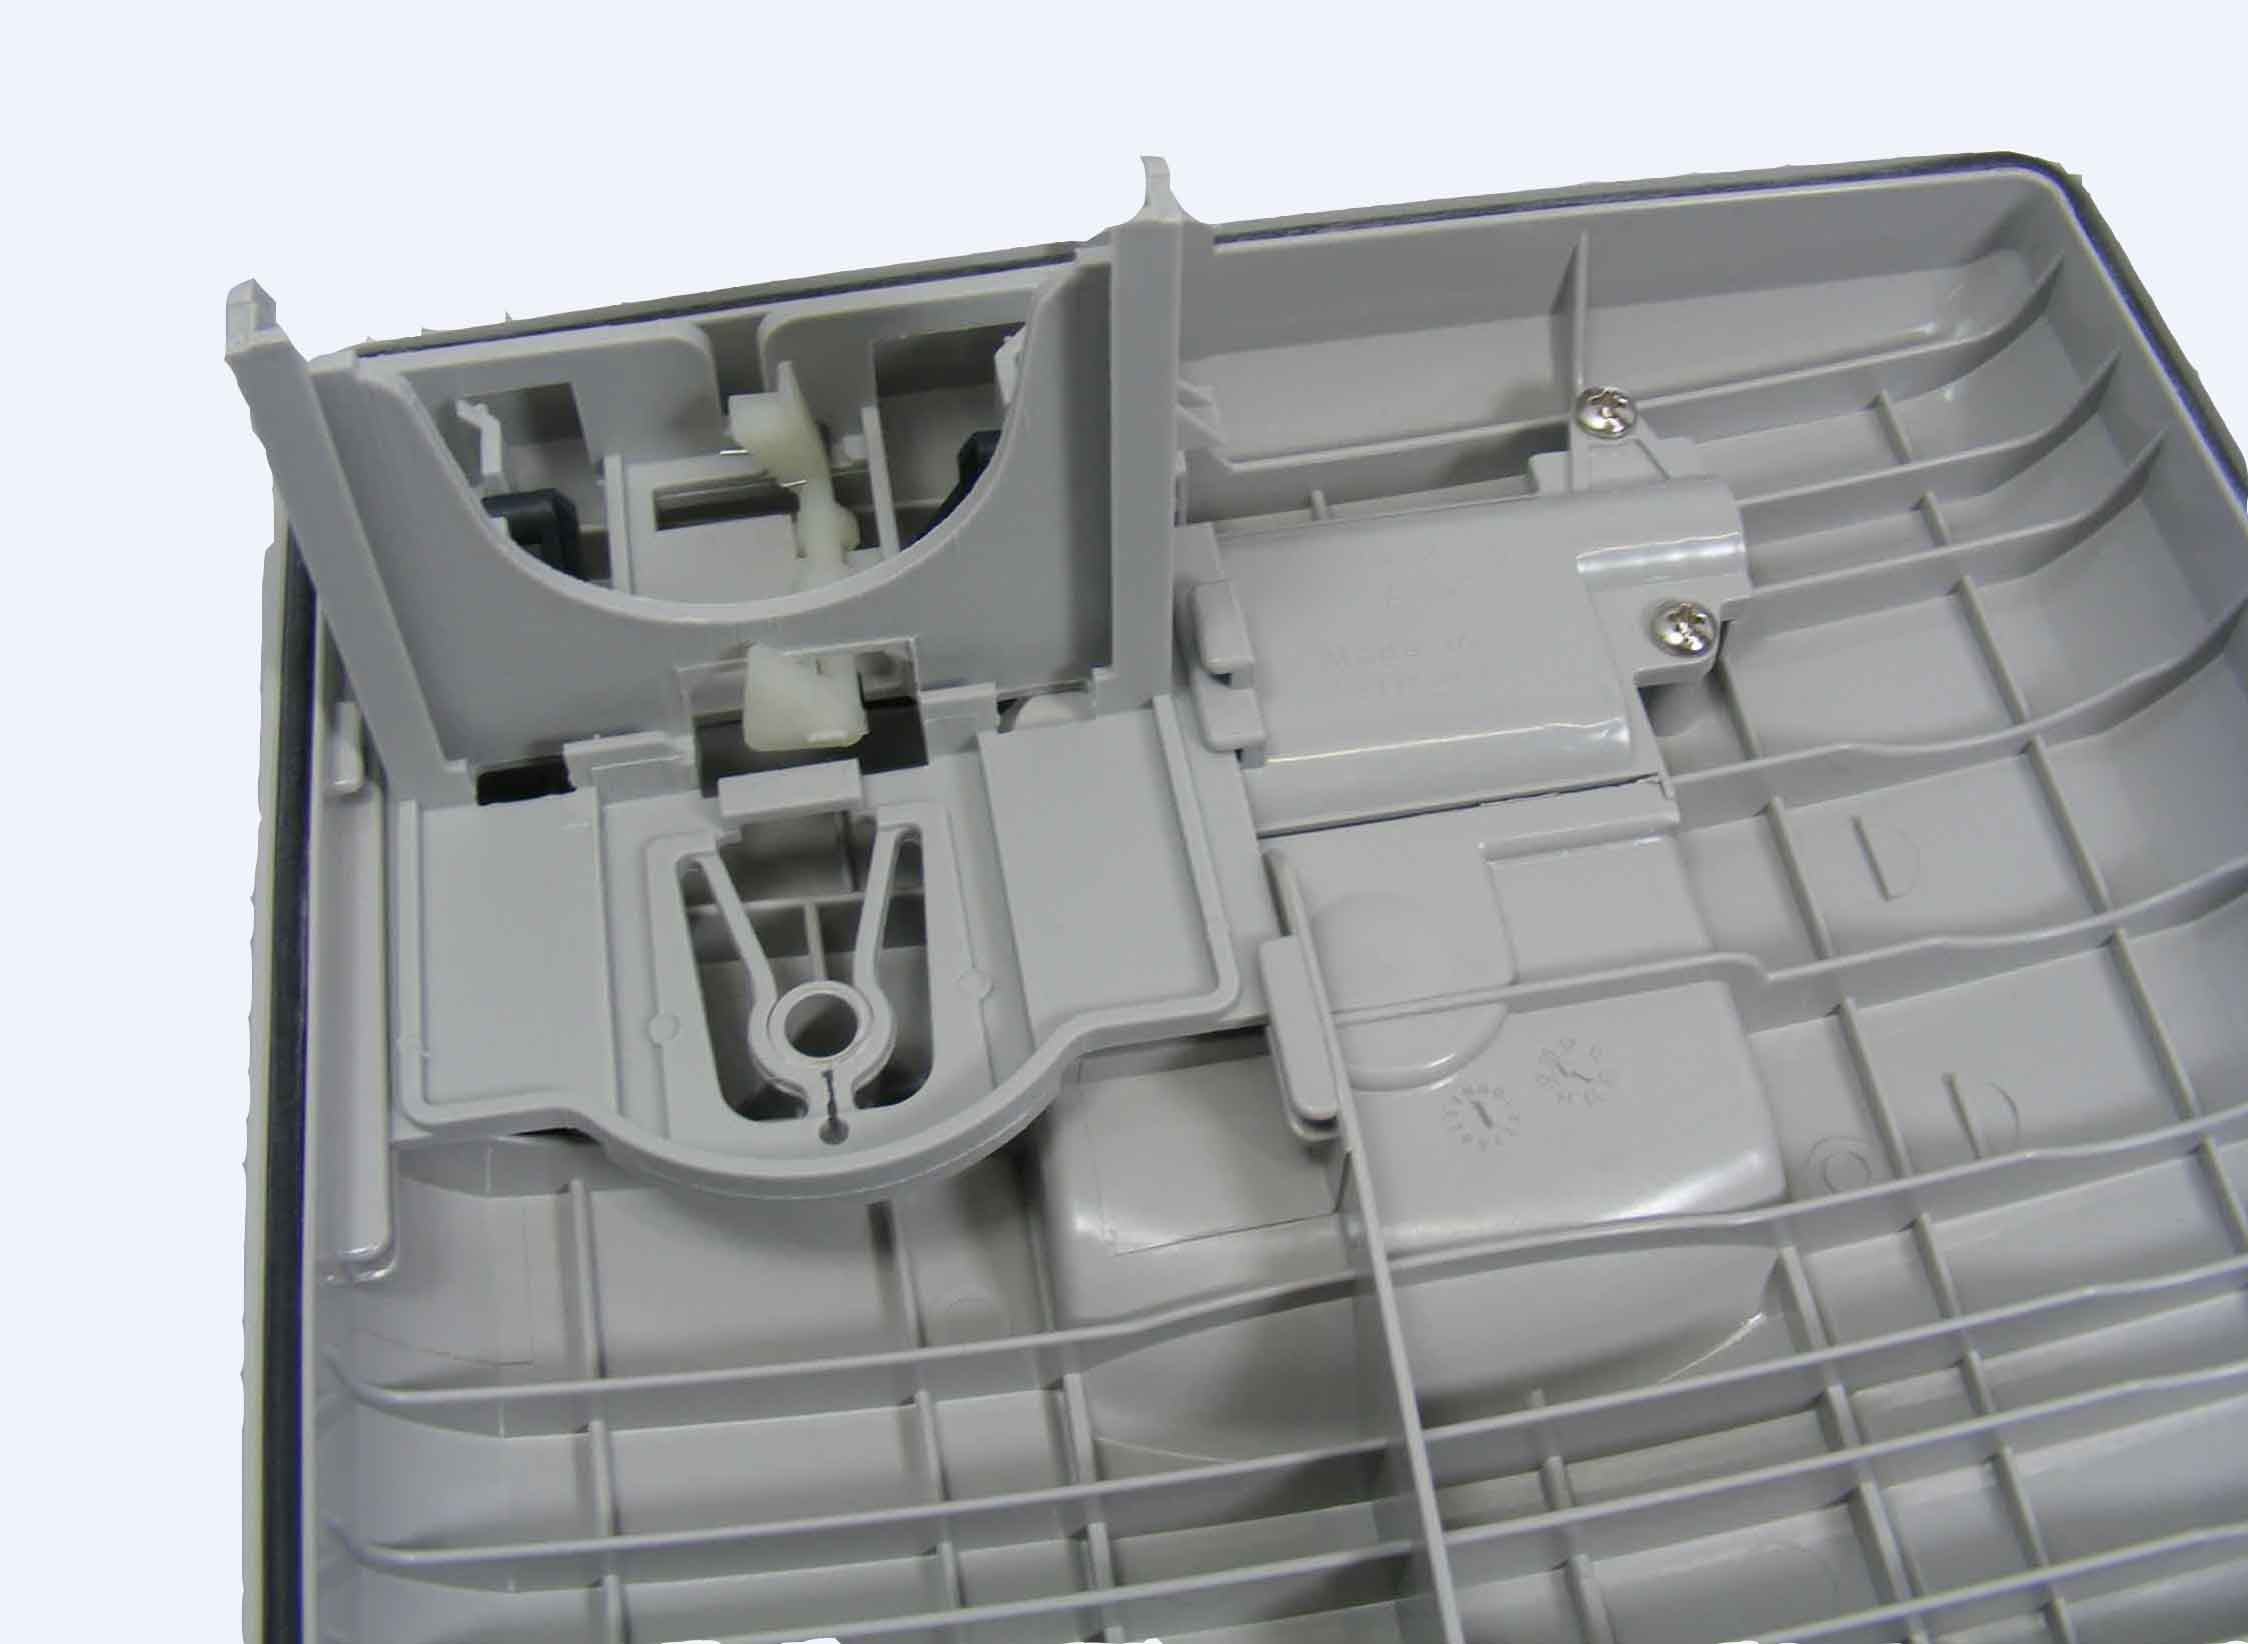 Sebo 5185gy X1 front cover - grey (NOW PART NO. 5805se)